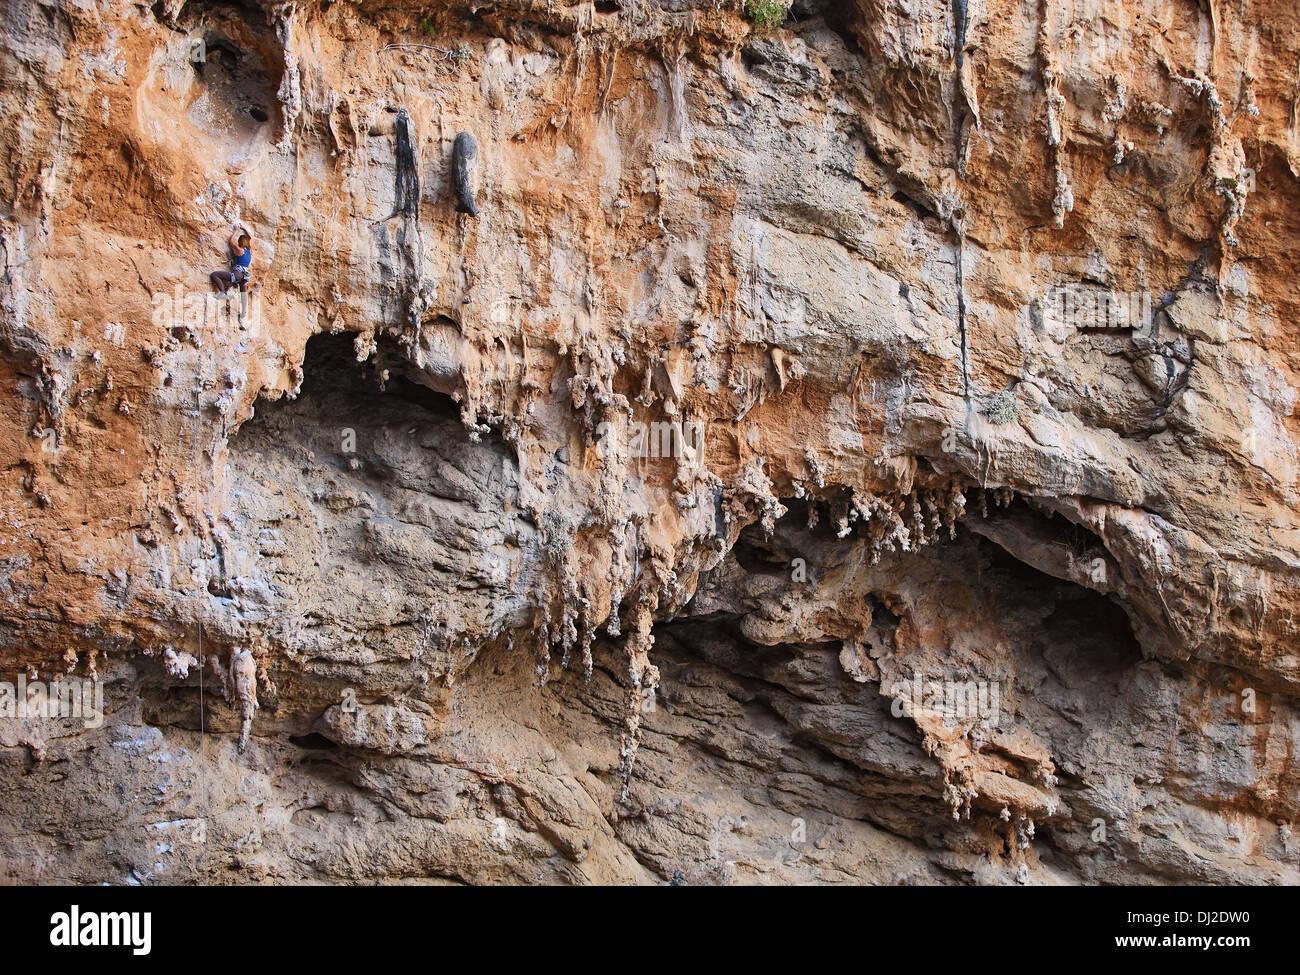 Female rock climber on a cliff face Stock Photo